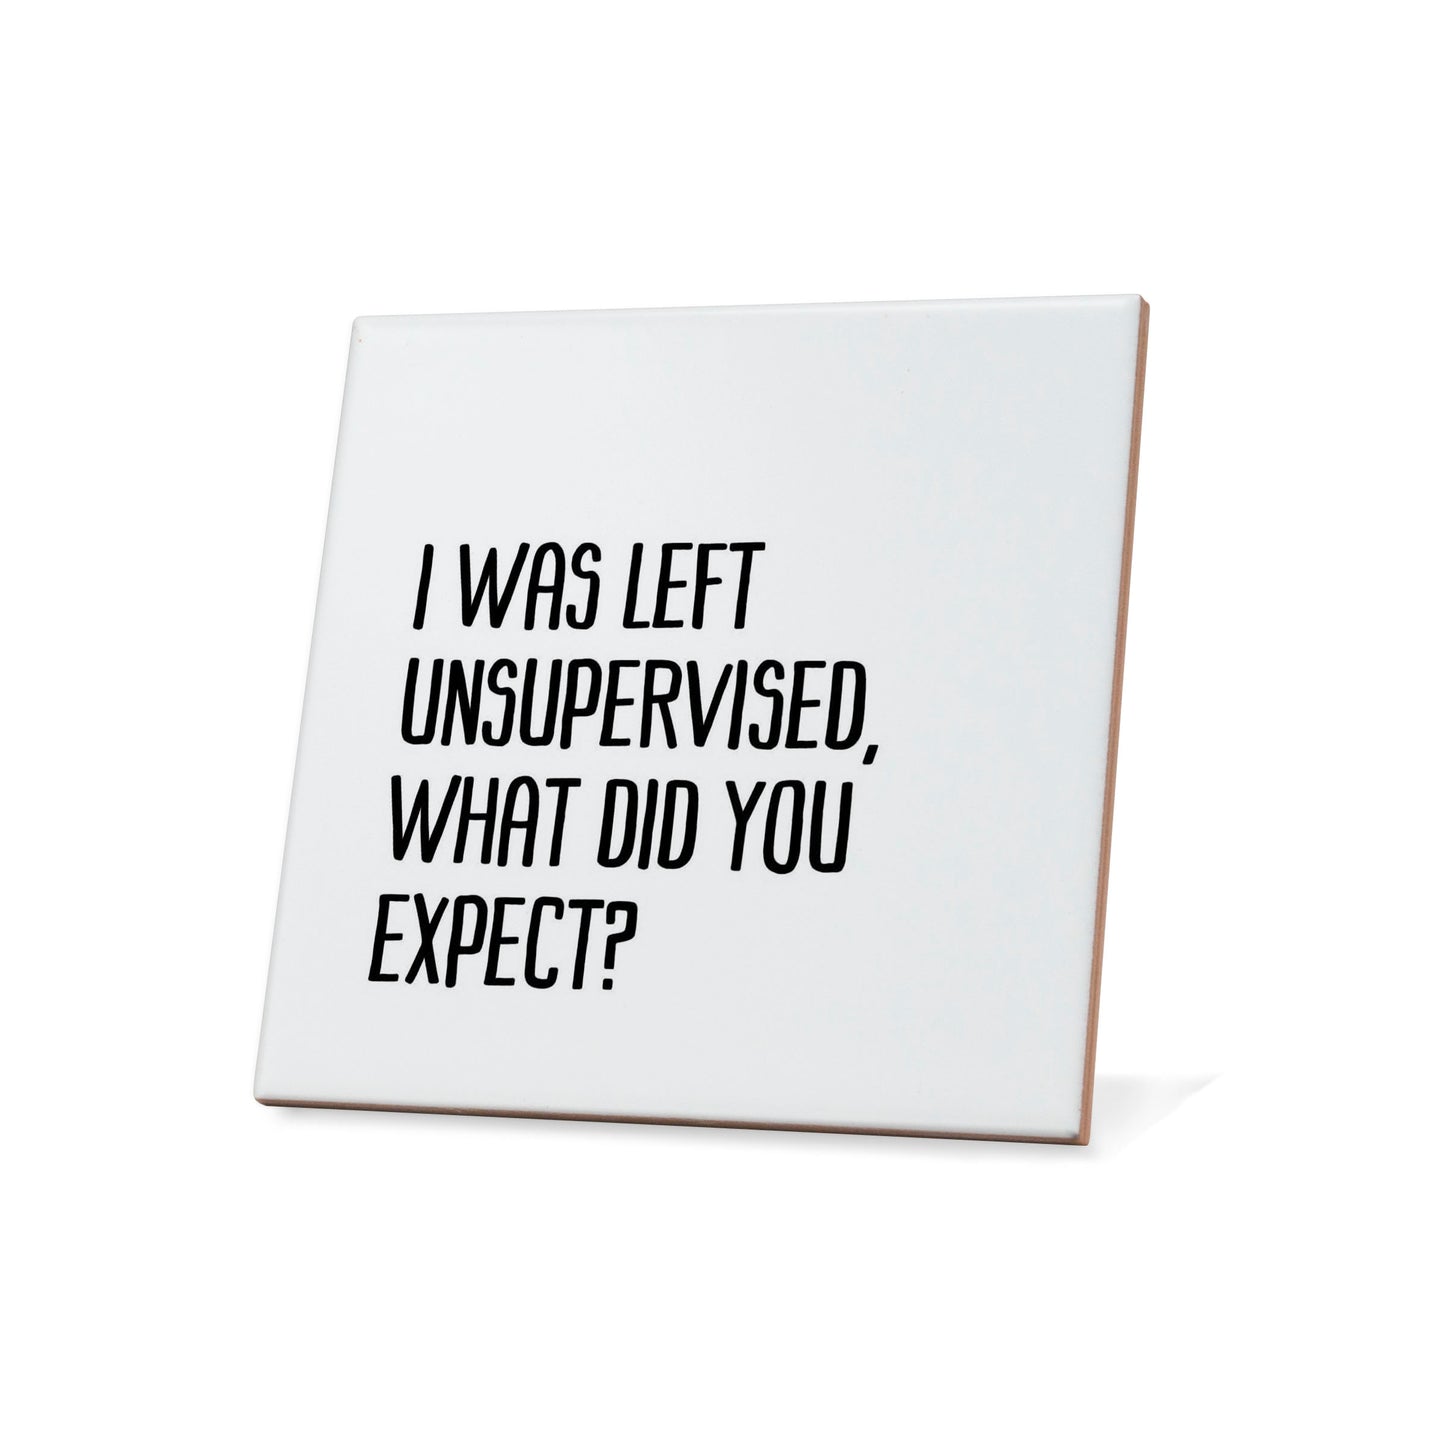 I was left unsupervised, what did you expect? Quote Coaster